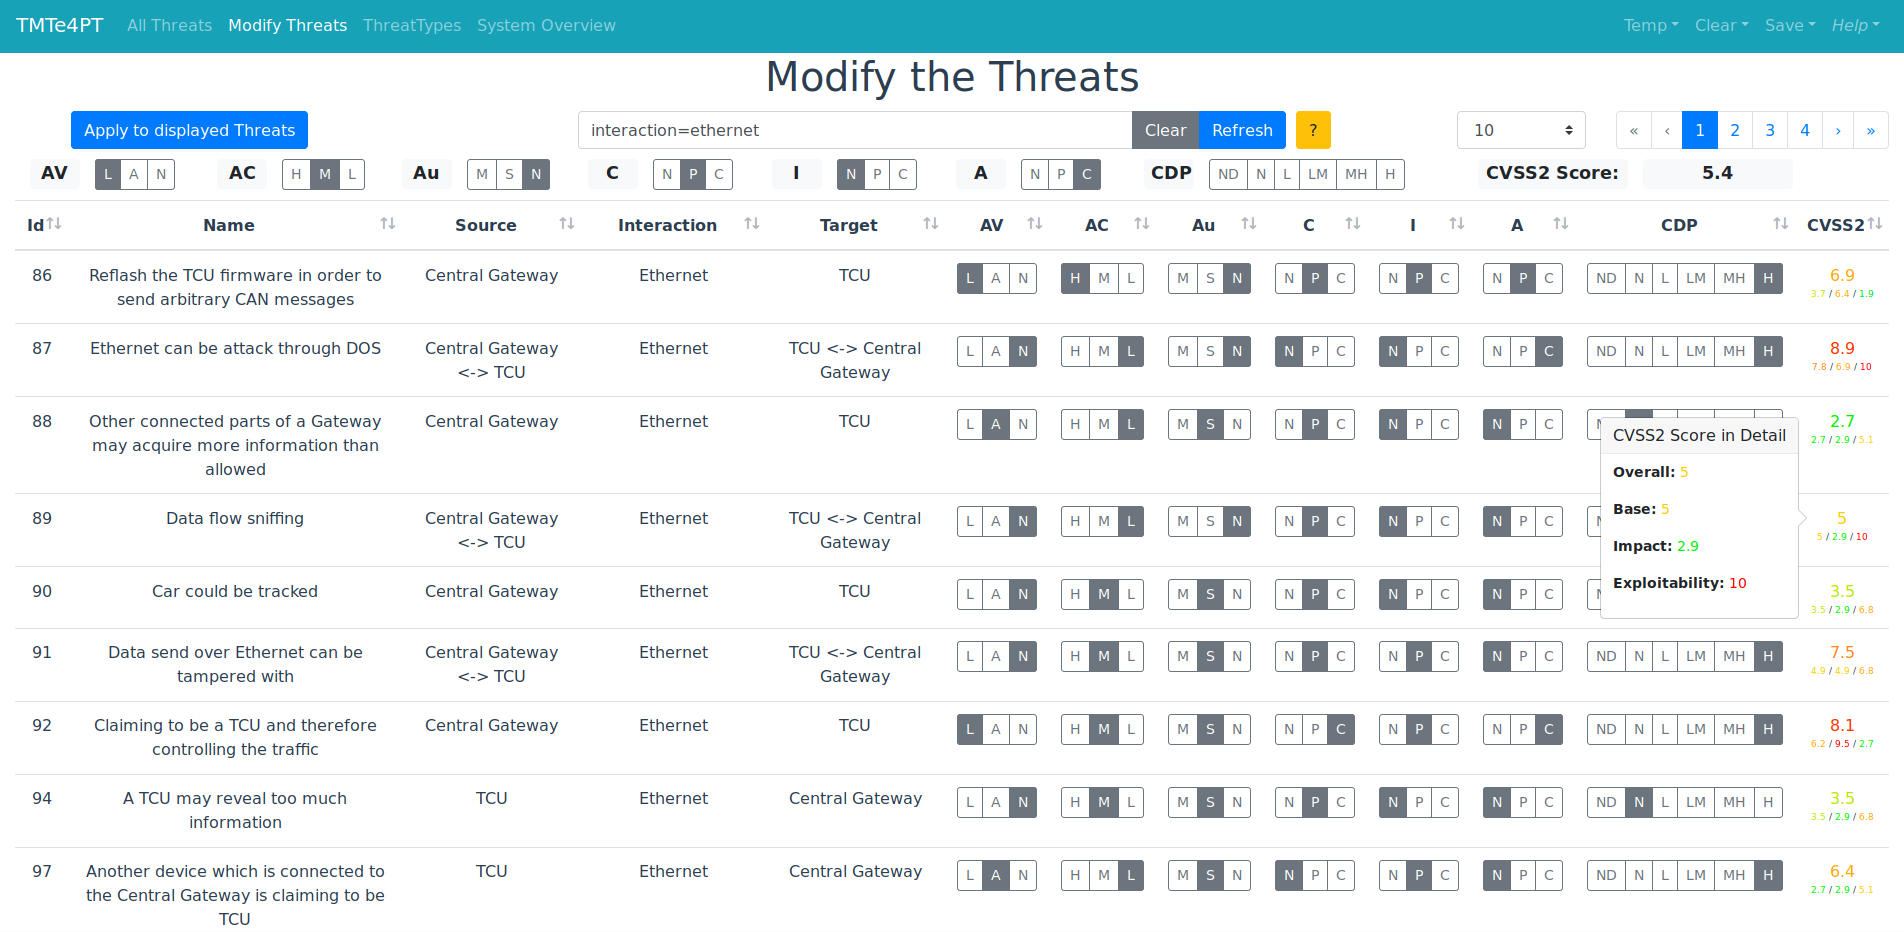 Image of the Modify the Threats Tab of the TMTe4PT tool.